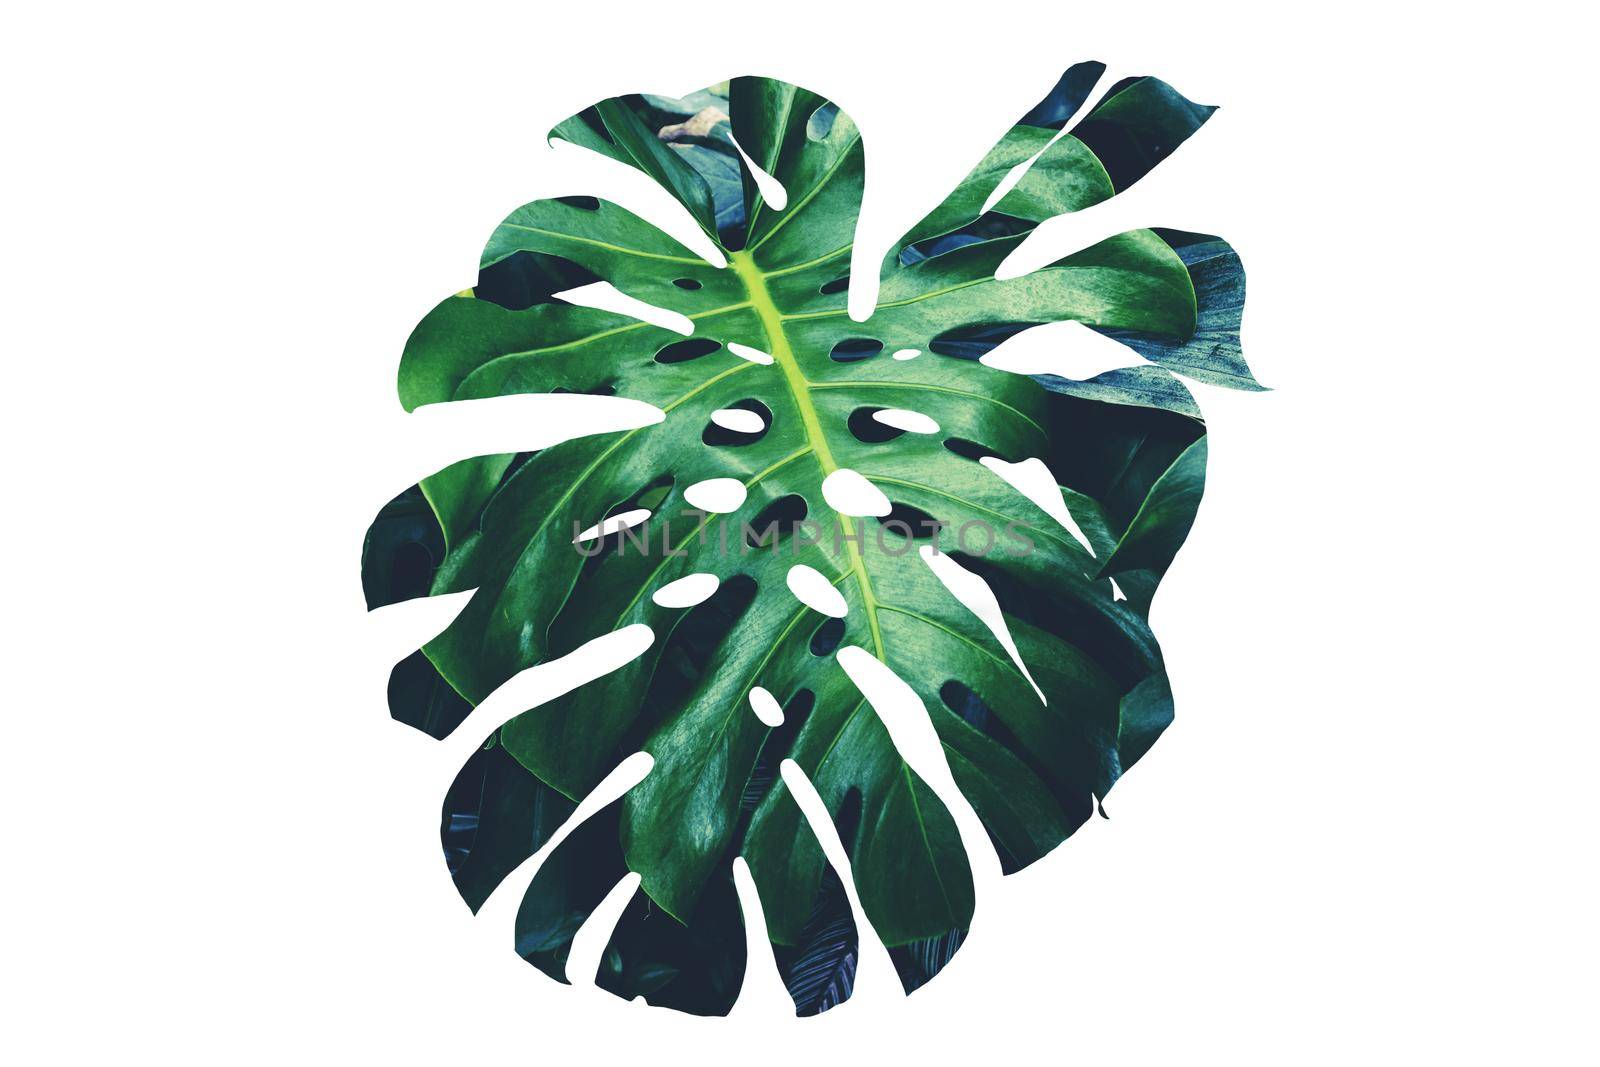 Double exposure monstera leaf  by Wasant